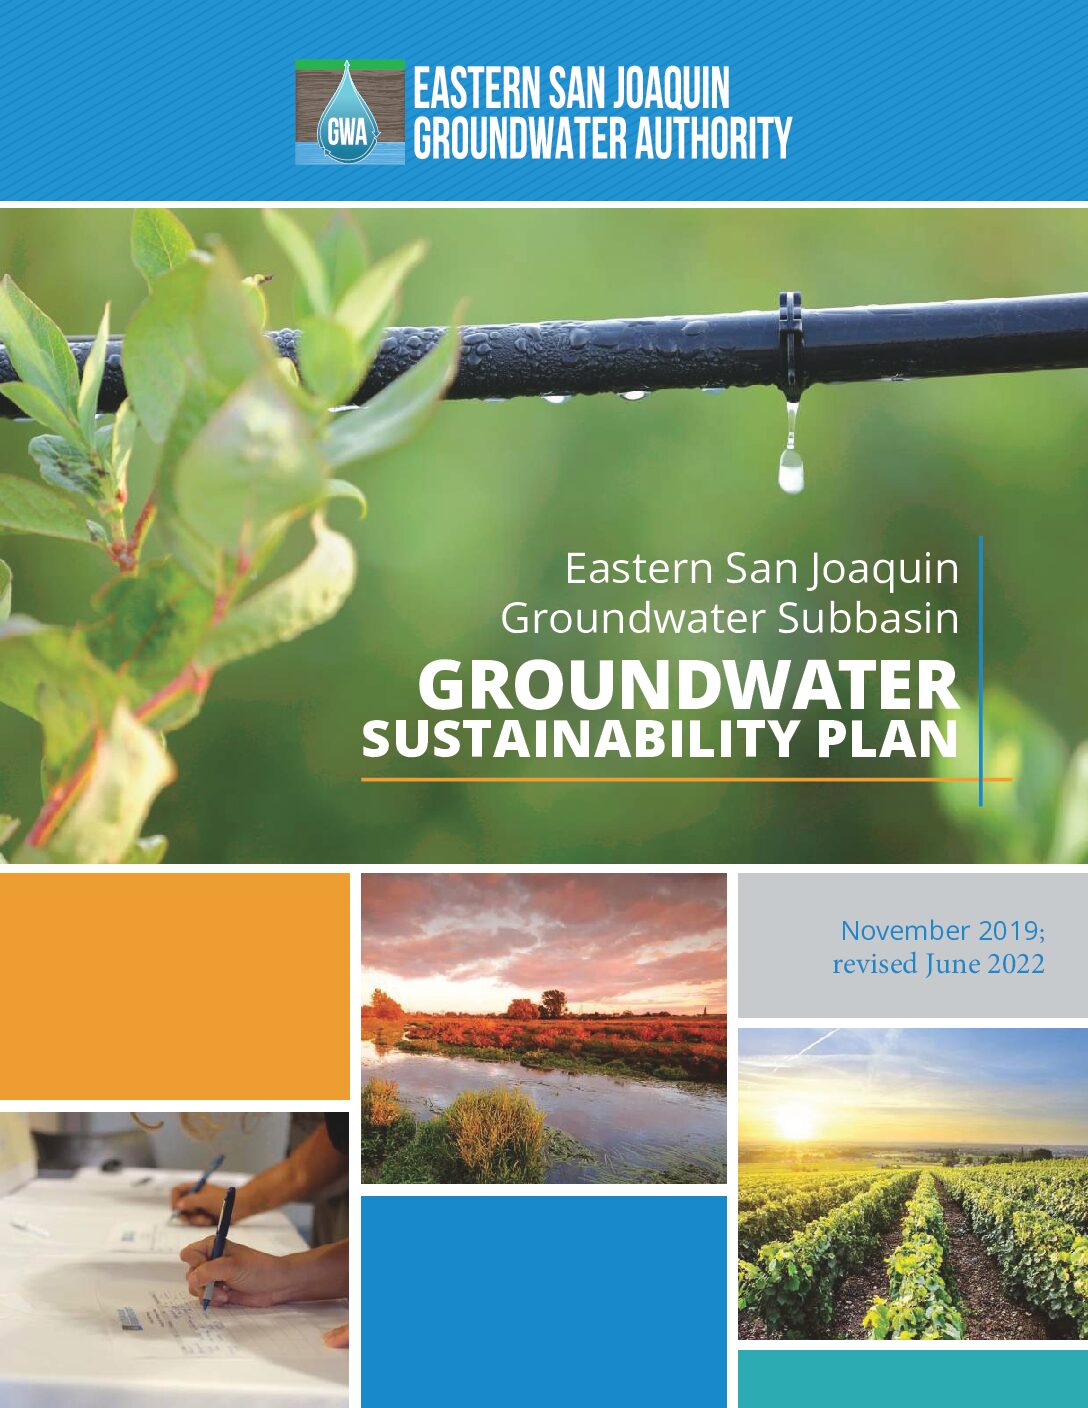 Eastern San Joaquin Groundwater Subbasin Groundwater Sustainability Plan (Revised)